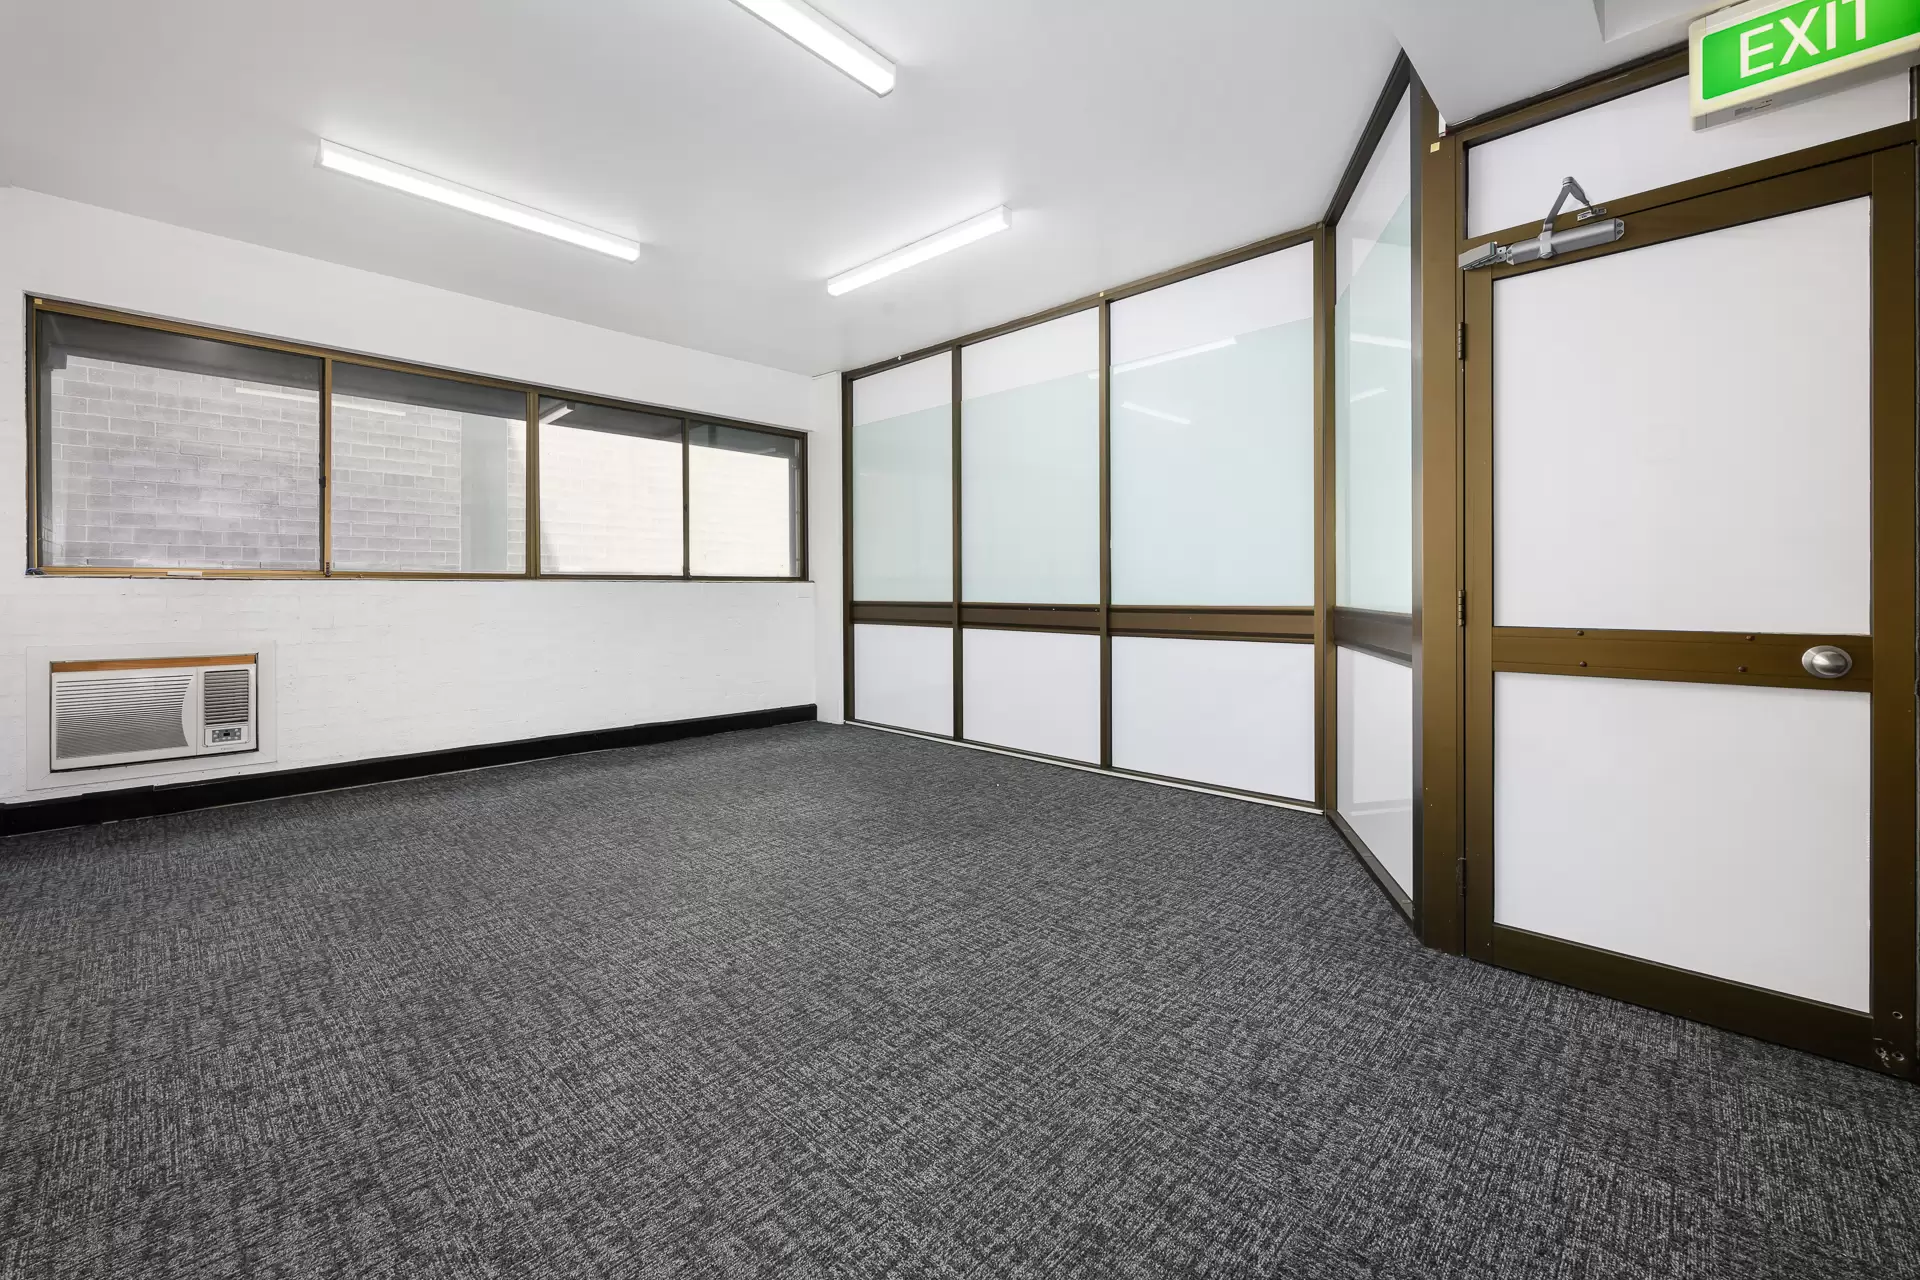 Suite 101/32 Burns Bay Road, Lane Cove For Lease by Shead Property - image 1